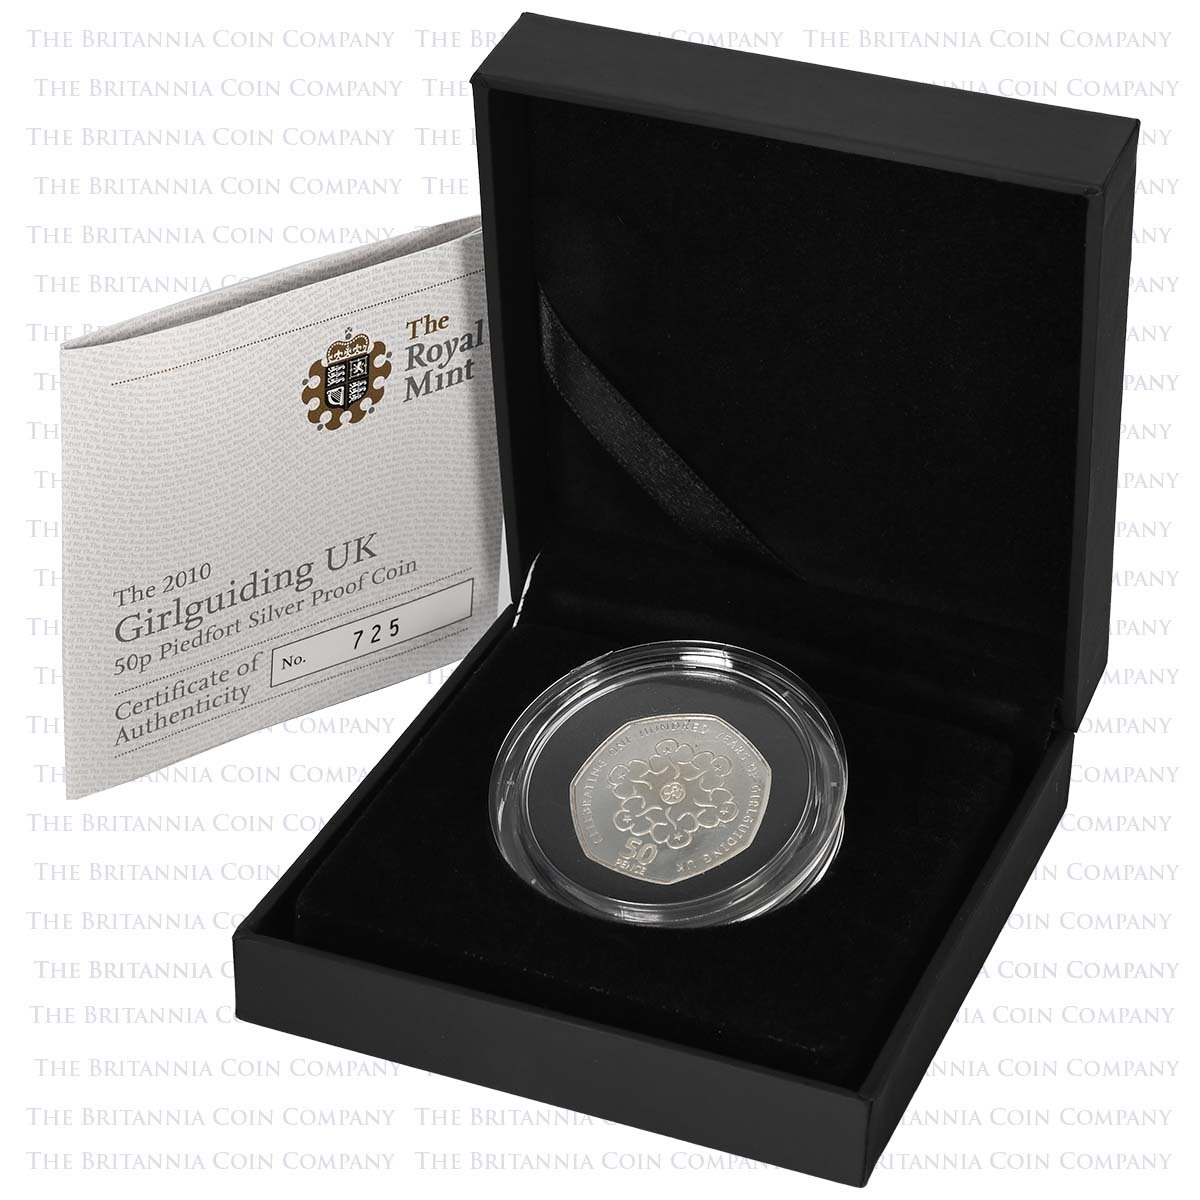 UKGGPF 2010 Girl Guides 50p Piedfort Silver Proof Boxed